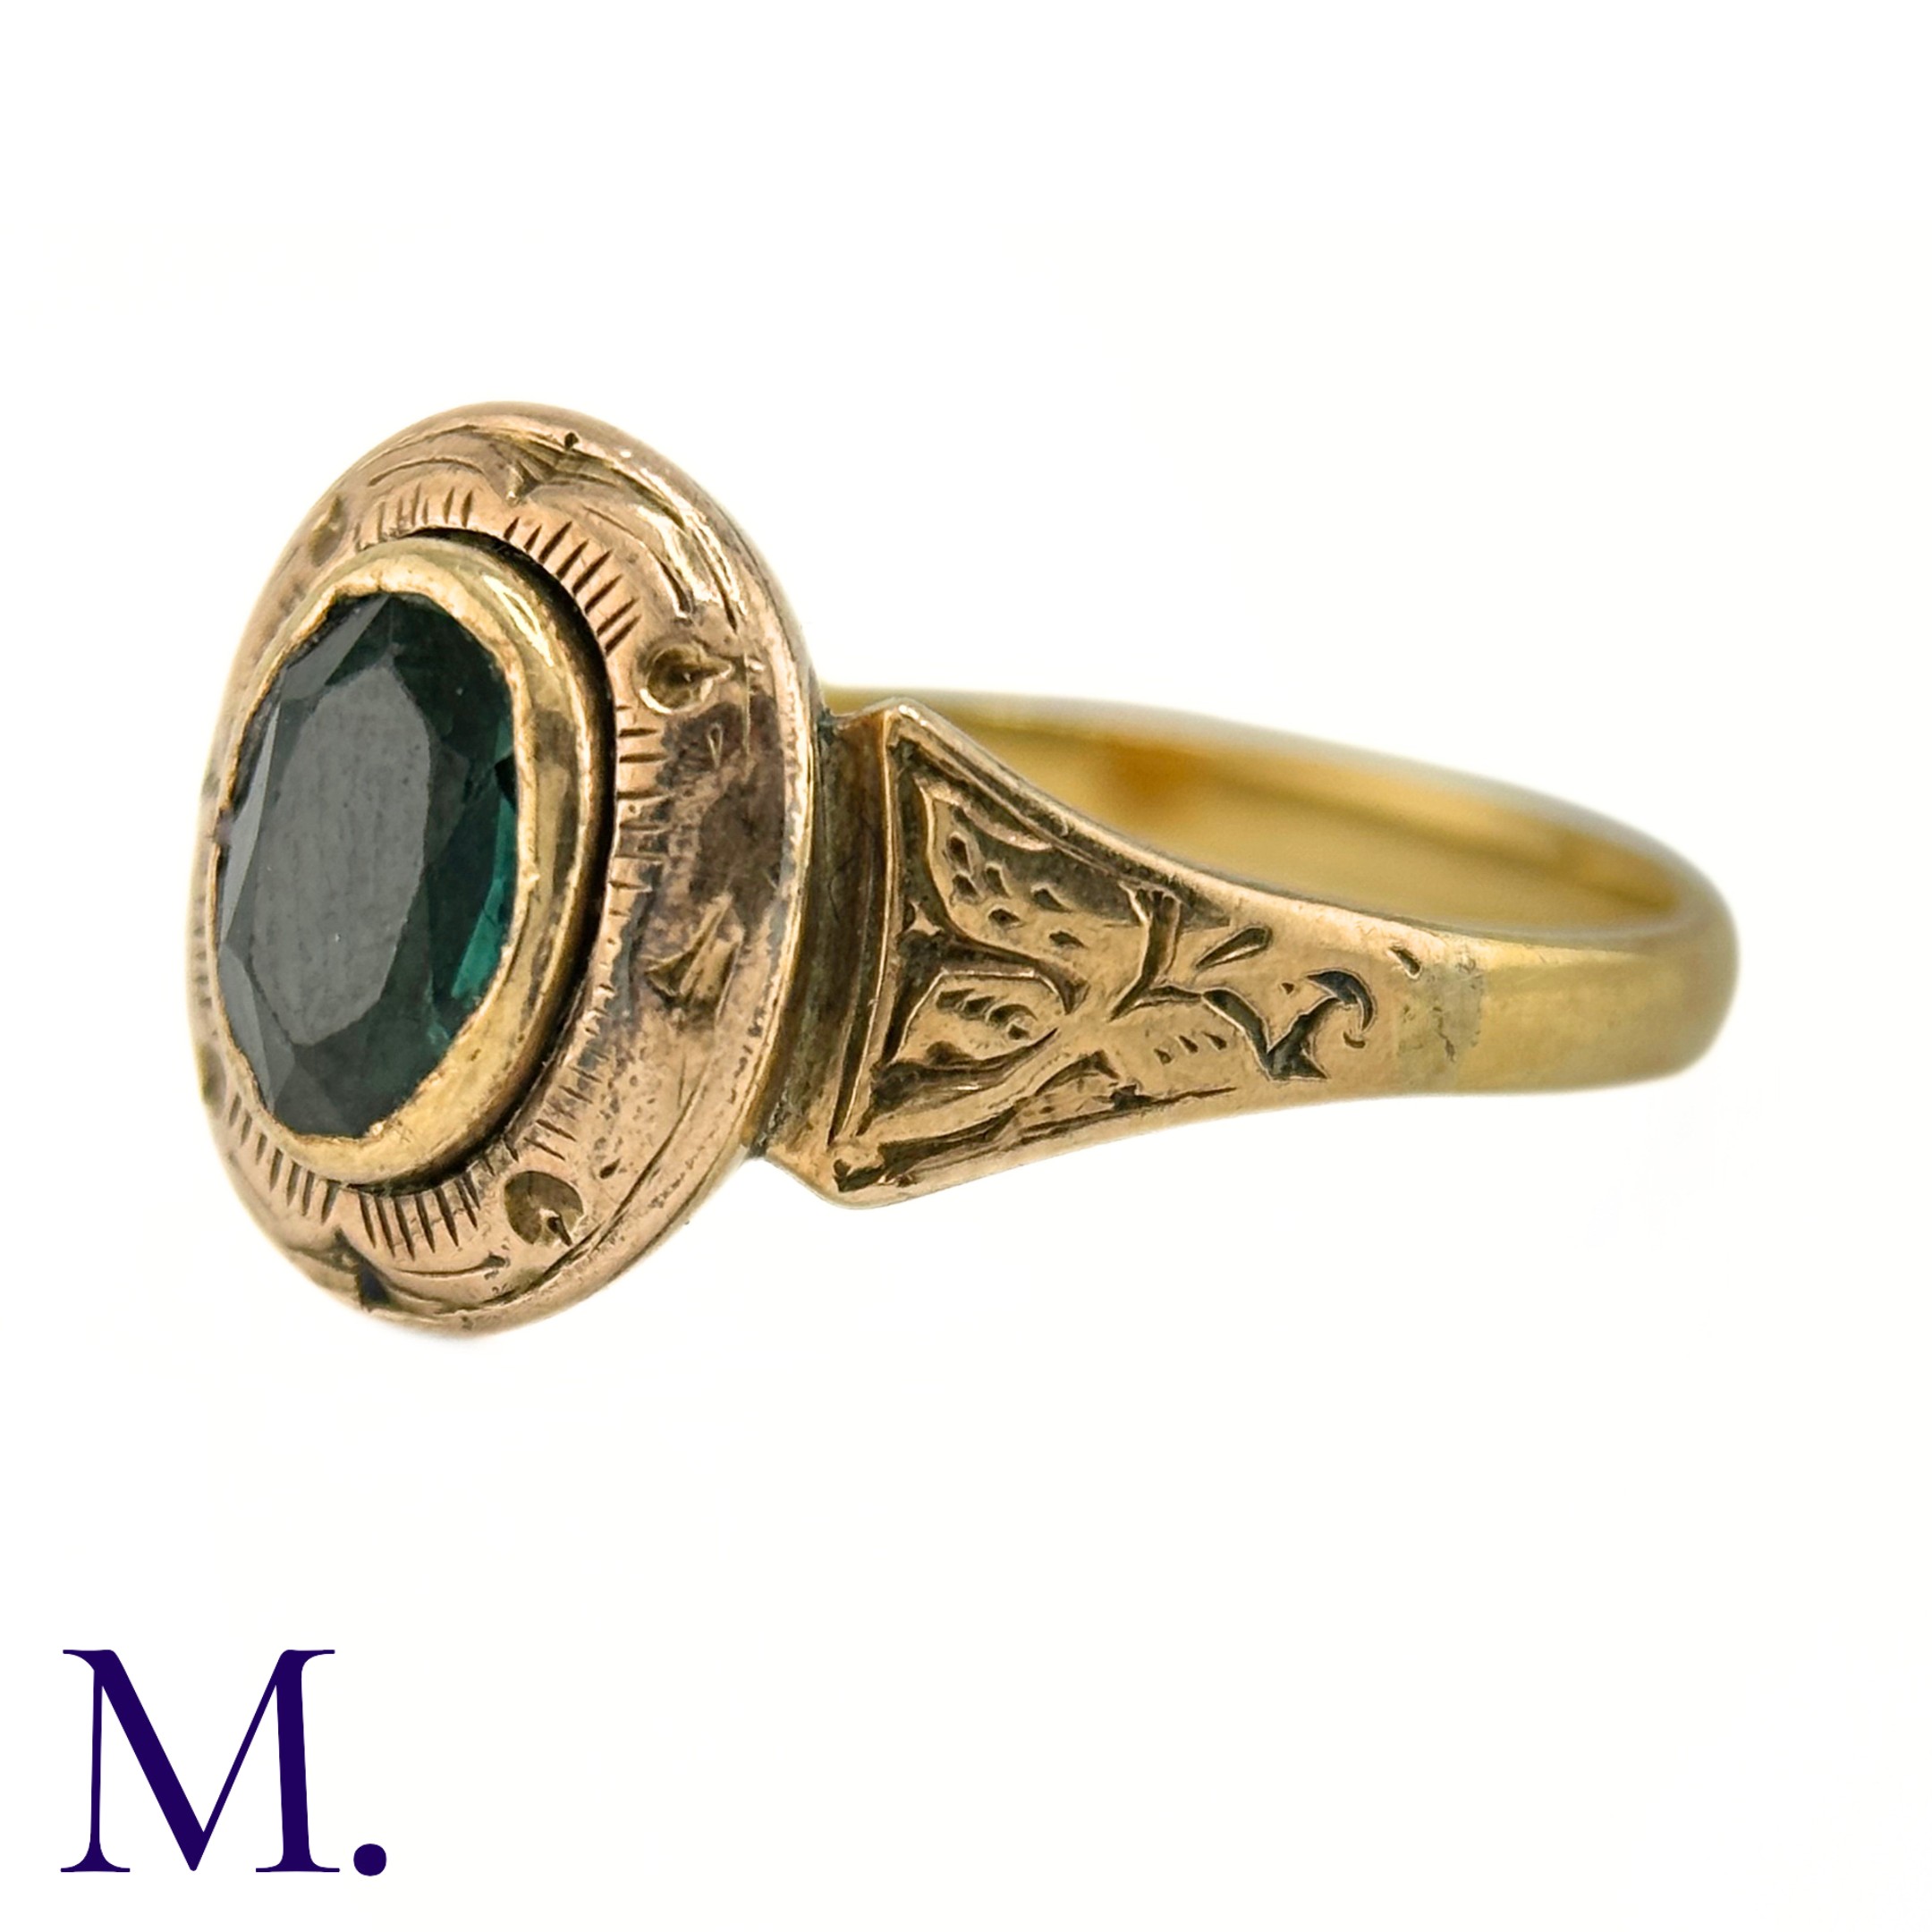 An Antique Green Tourmaline Ring The gold ring is set with an oval green tourmaline and the band and - Image 5 of 6